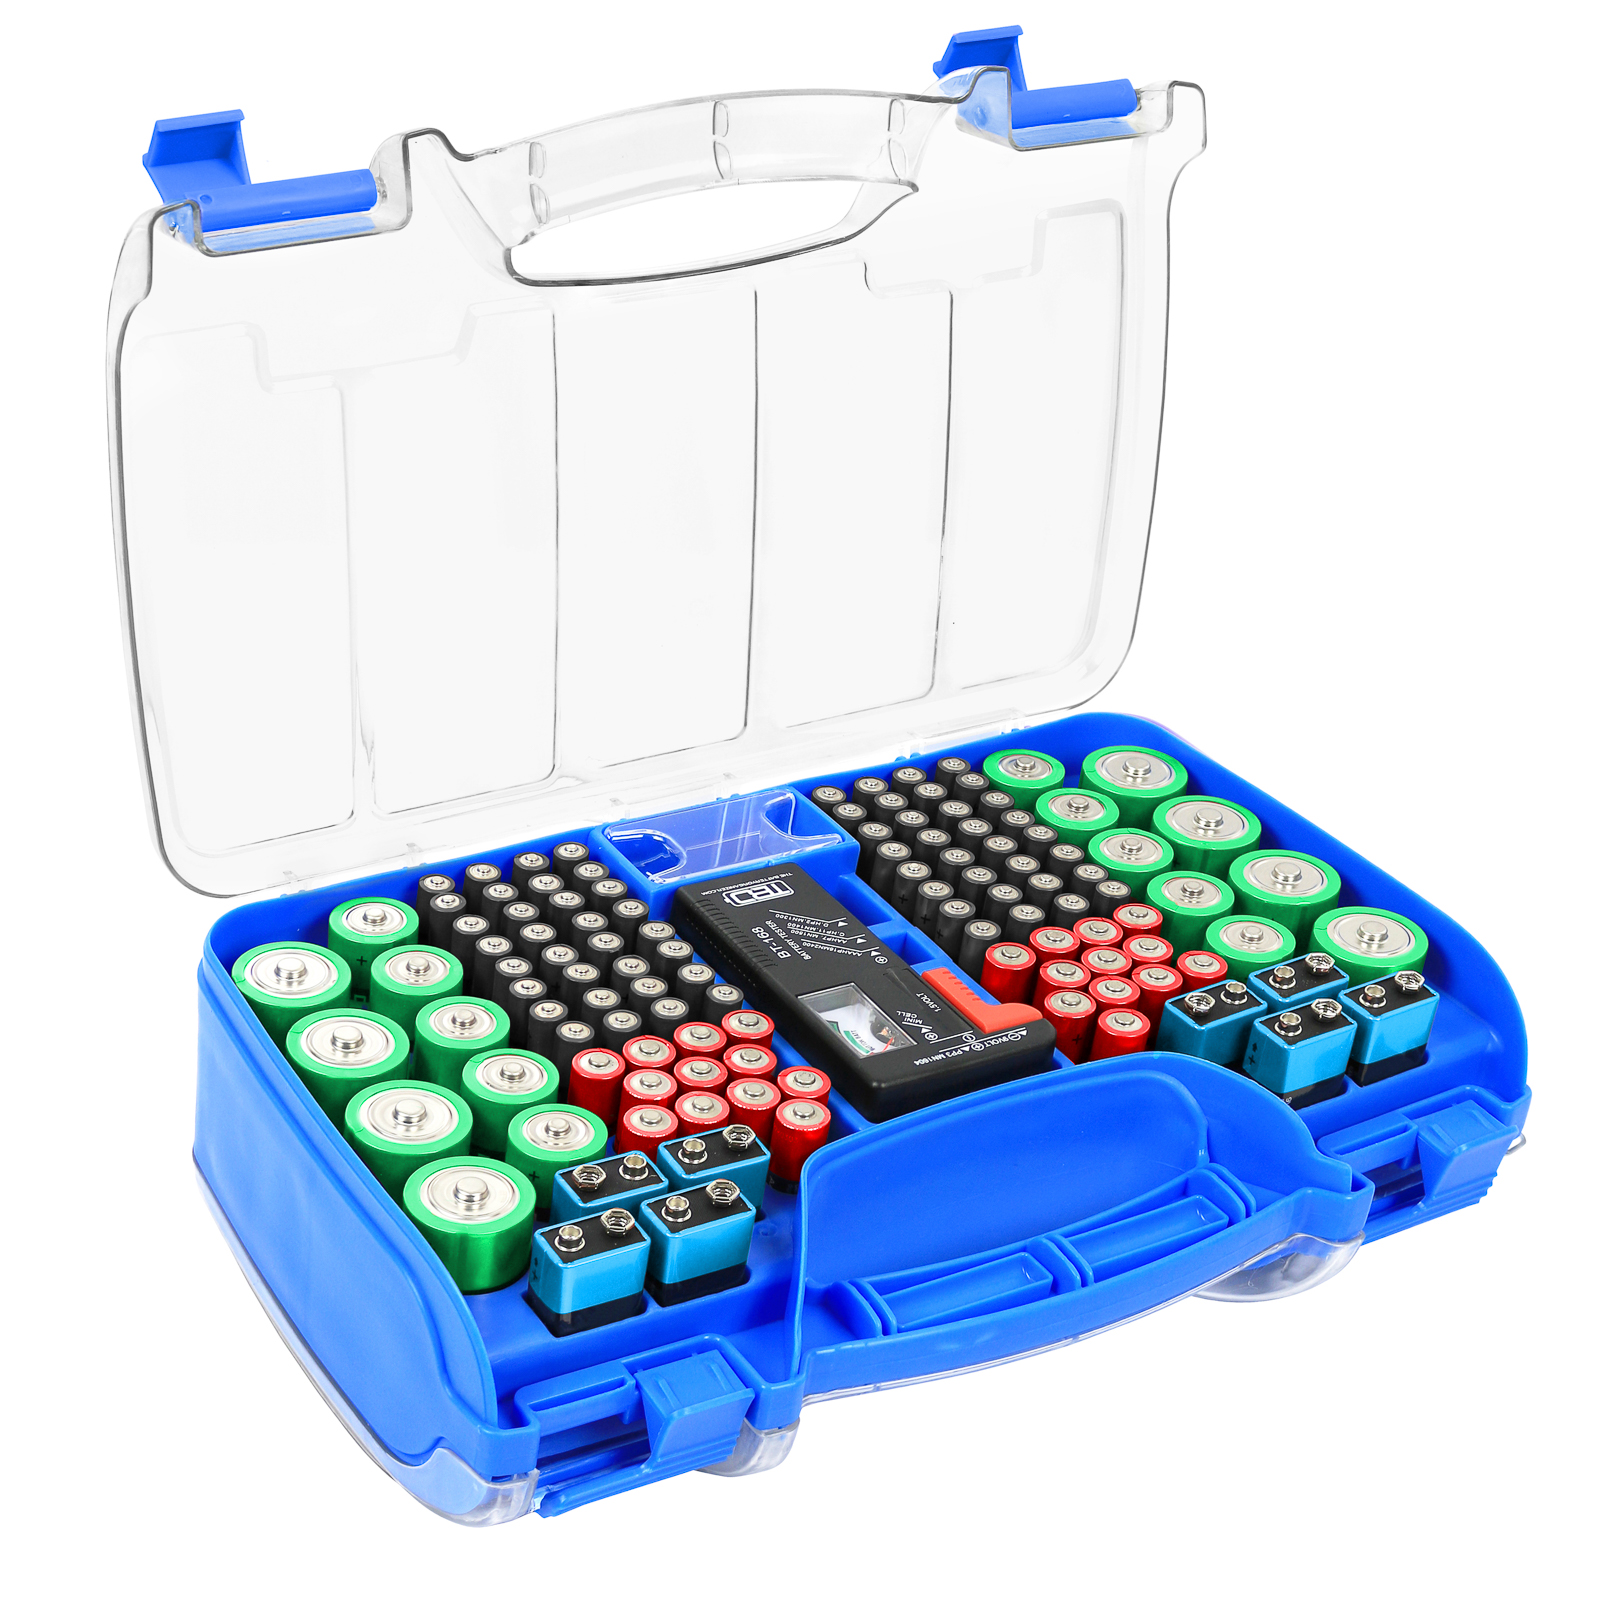 The Battery Organizer Battery Storage Case with Hinged Clear Cover, Includes a Removable Battery Tester, Holds 180 Batteries Various Sizes Blue. - image 2 of 7